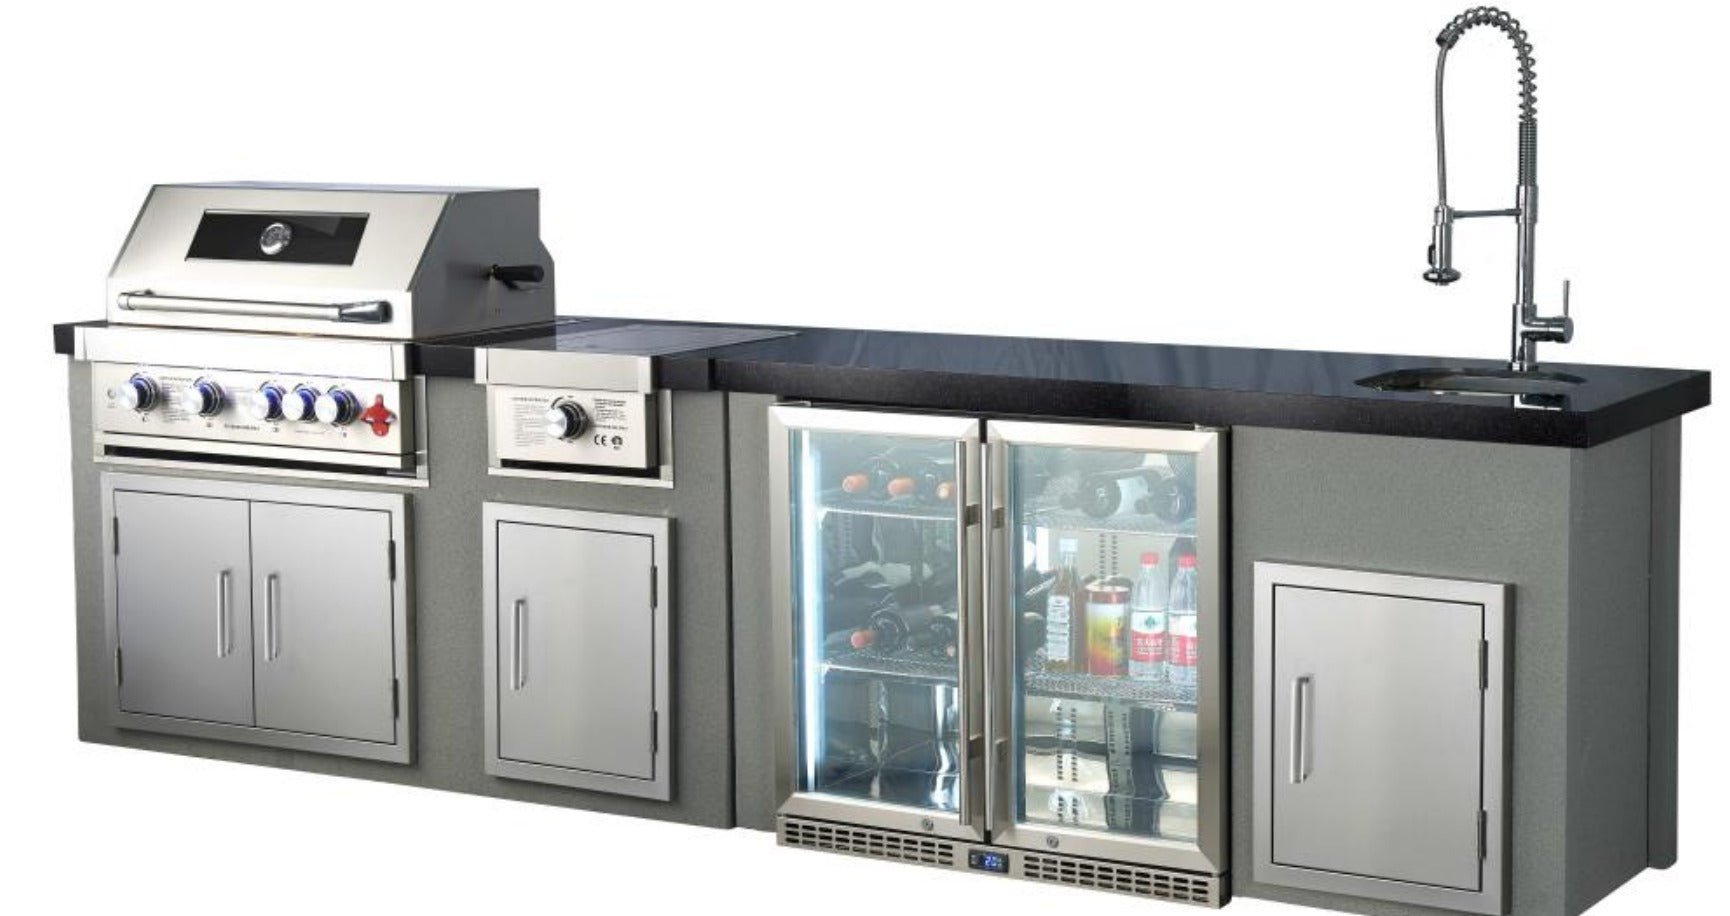 Sunzout Brand 130" Grey Stone Outdoor Kitchen with Grill, Side Burner, Sink and Double Refrigerator - Sunzout Outdoor Spaces LLC